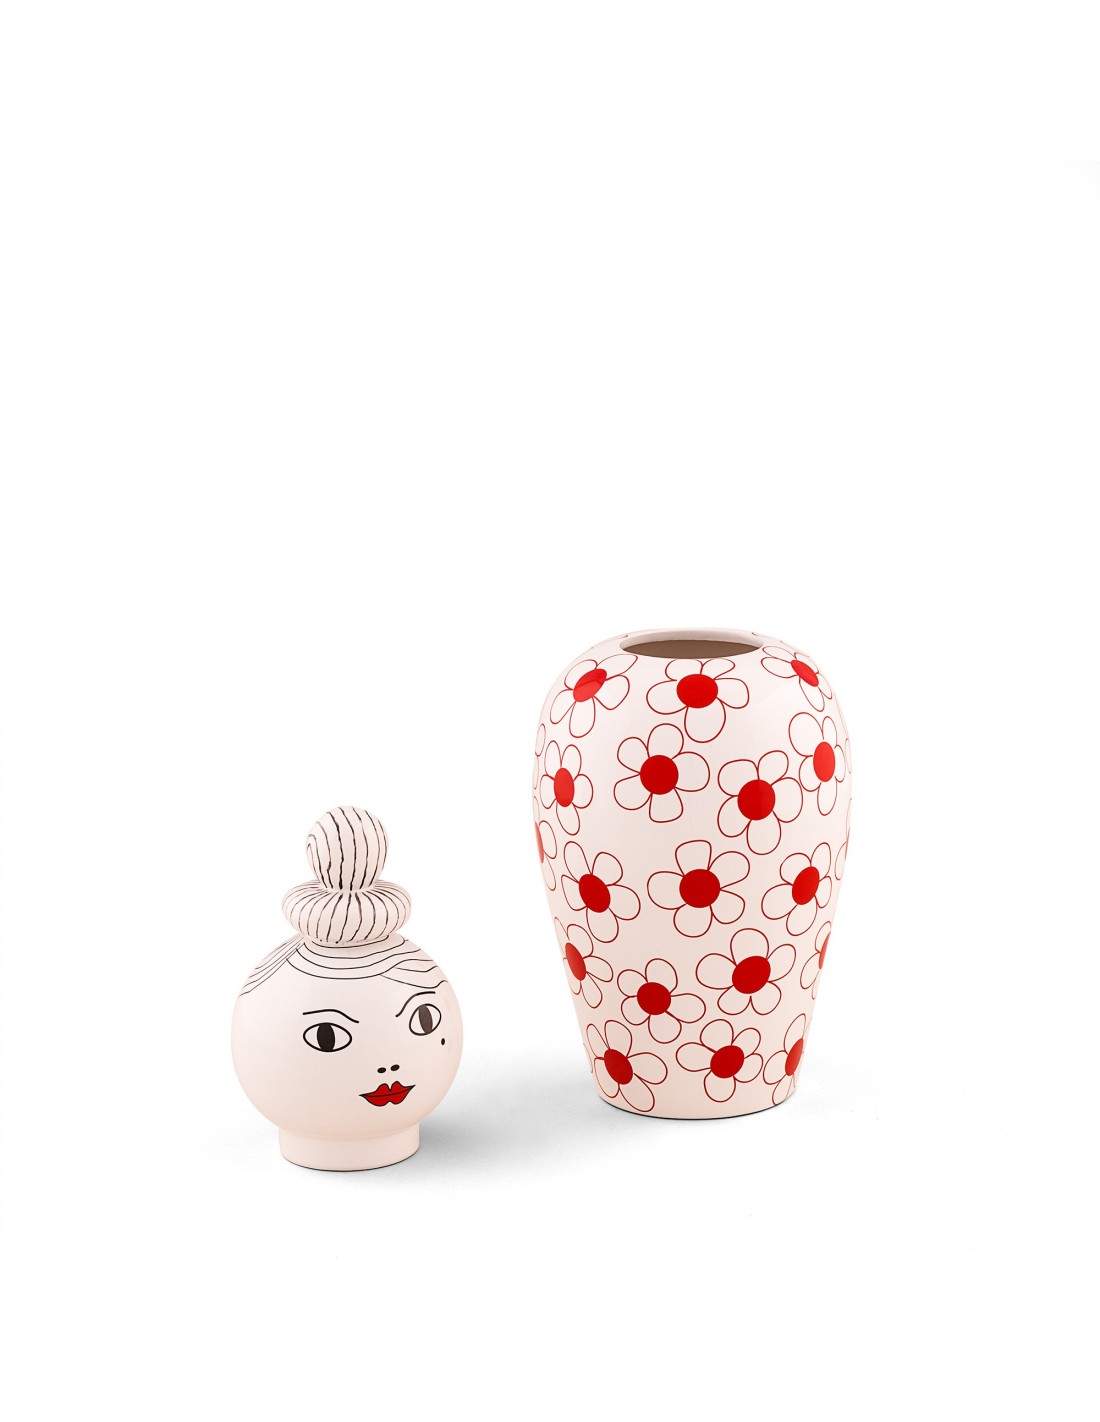 Buy SELETTI Vase online? Fast and safe delivery!